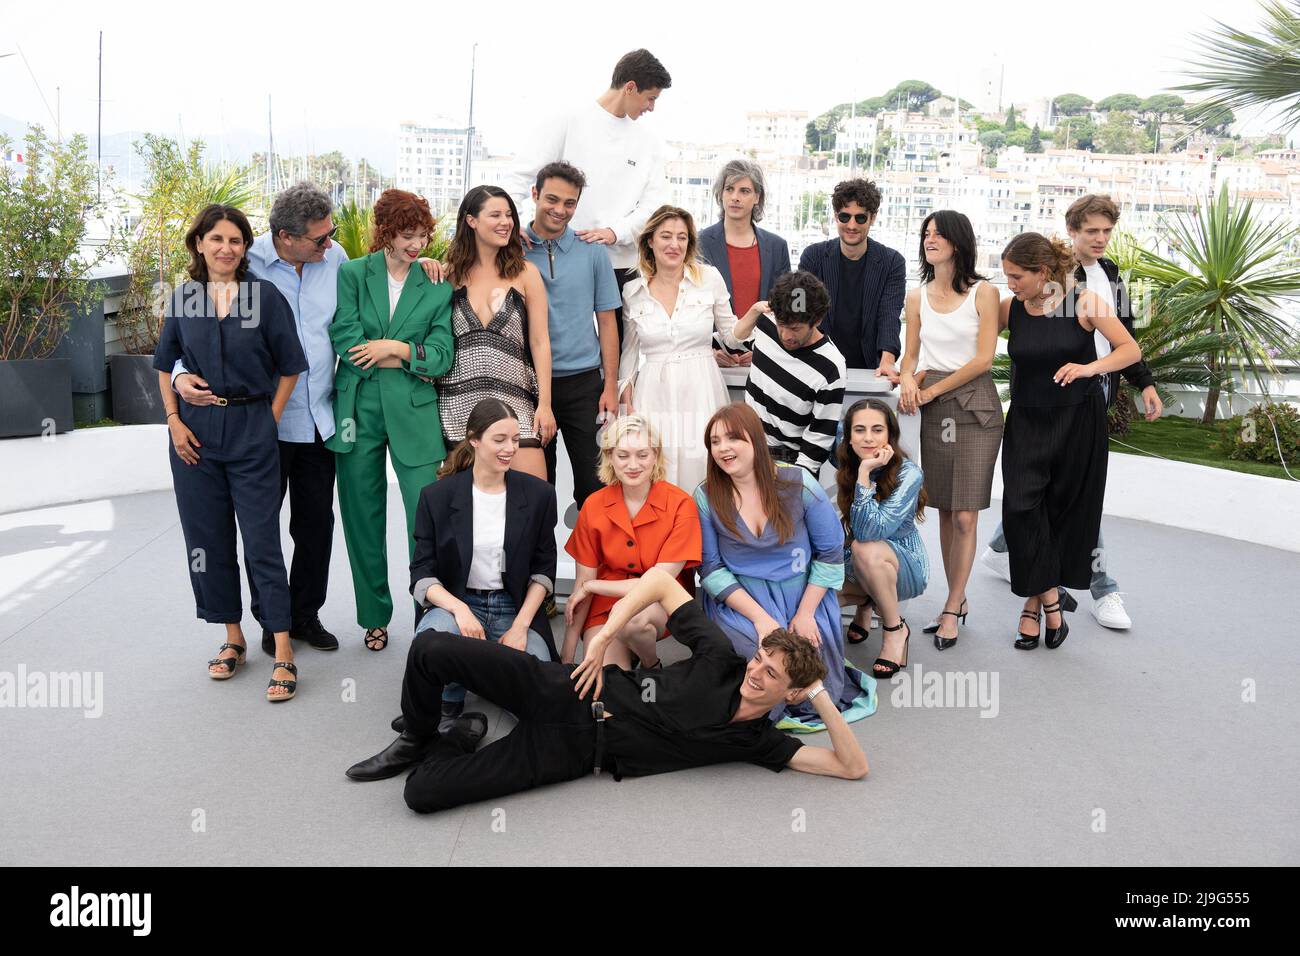 Clara Bretheau, Alexia Chardard, Sofiane Bennacer, Noham Edje, Director Valeria Bruni Tedeschi, Nadia Tereszkiewicz, Micha Lescot, Louis Garrel and Suzanne Lindon. Front : Eva Danino, Vassili Schneider, Baptiste Carrion-Weiss, Liv Henneguier, Oscar Lesage, Lena Garrel and Sarah Henochsberg attend the photocall for Forever Young during the 75th annual Cannes film festival at Palais des Festivals on May 23, 2022 in Cannes, France. Photo by David Niviere/ABACAPRESS.COM Stock Photo